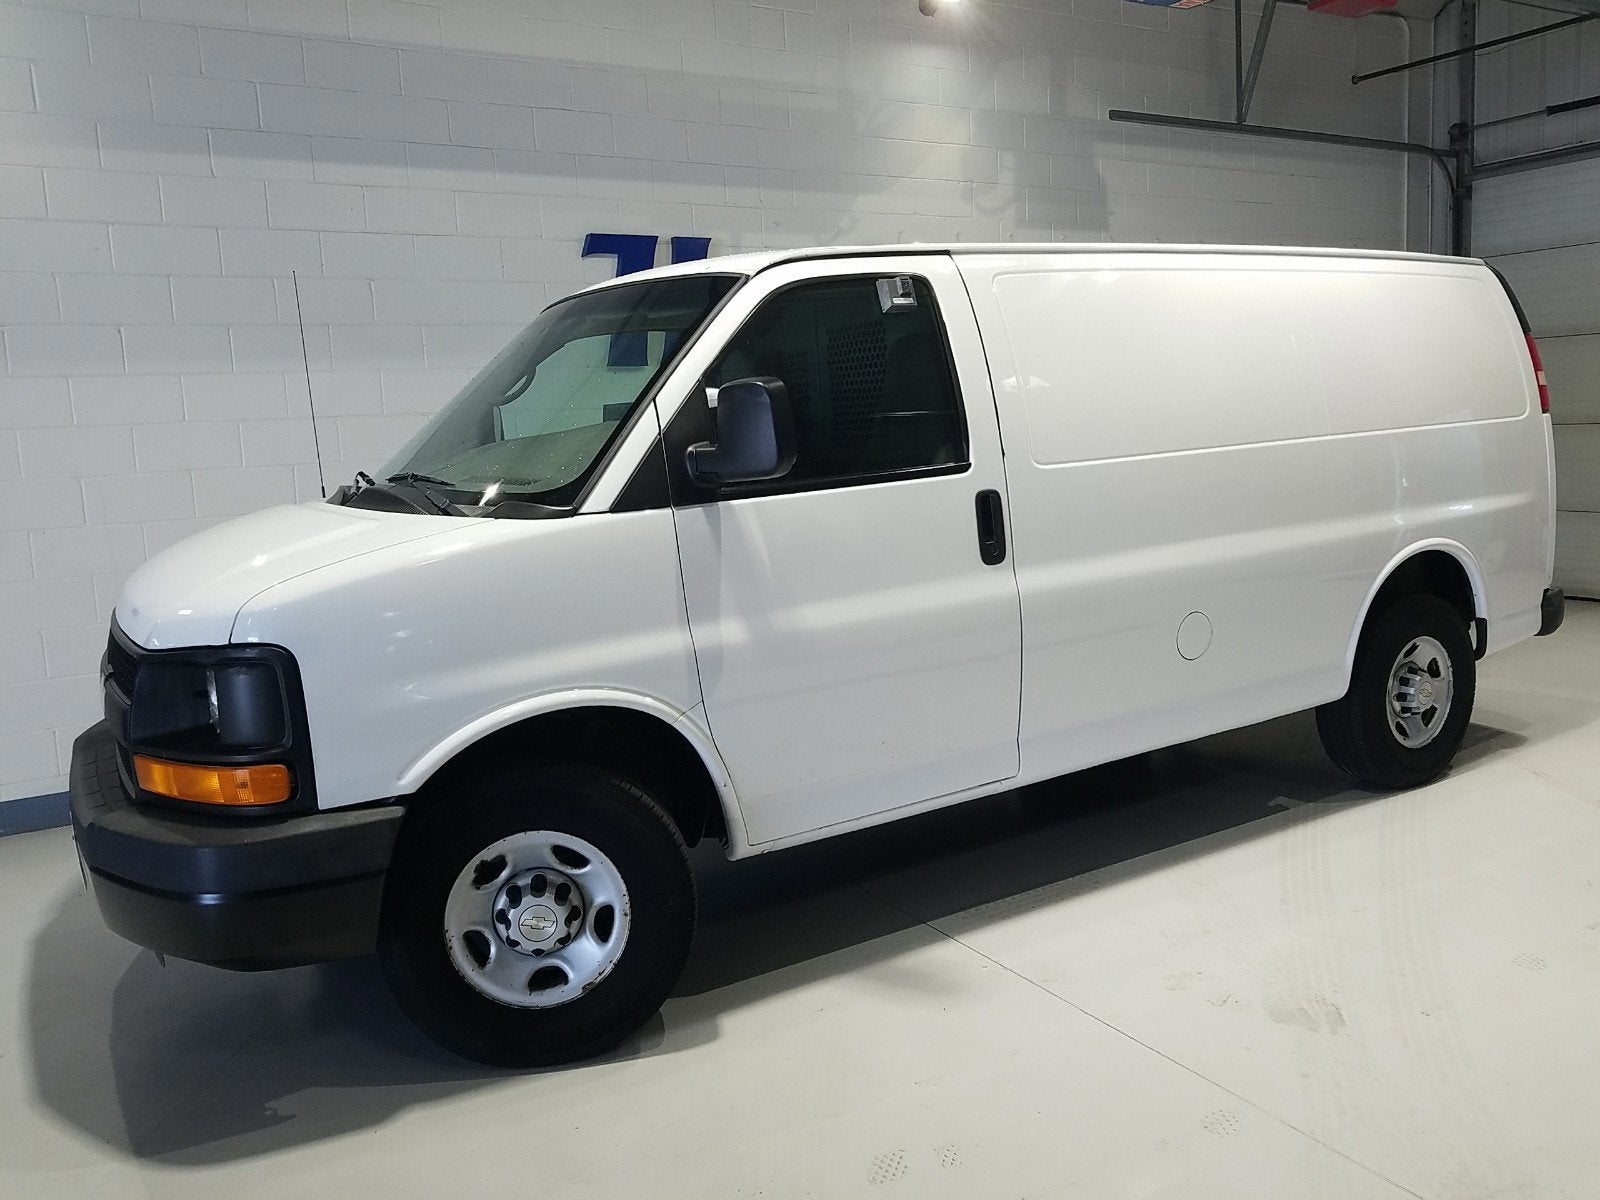 Used 2009 Chevrolet Express Cargo Work Van with VIN 1GCHG35K991175641 for sale in Tomahawk, WI